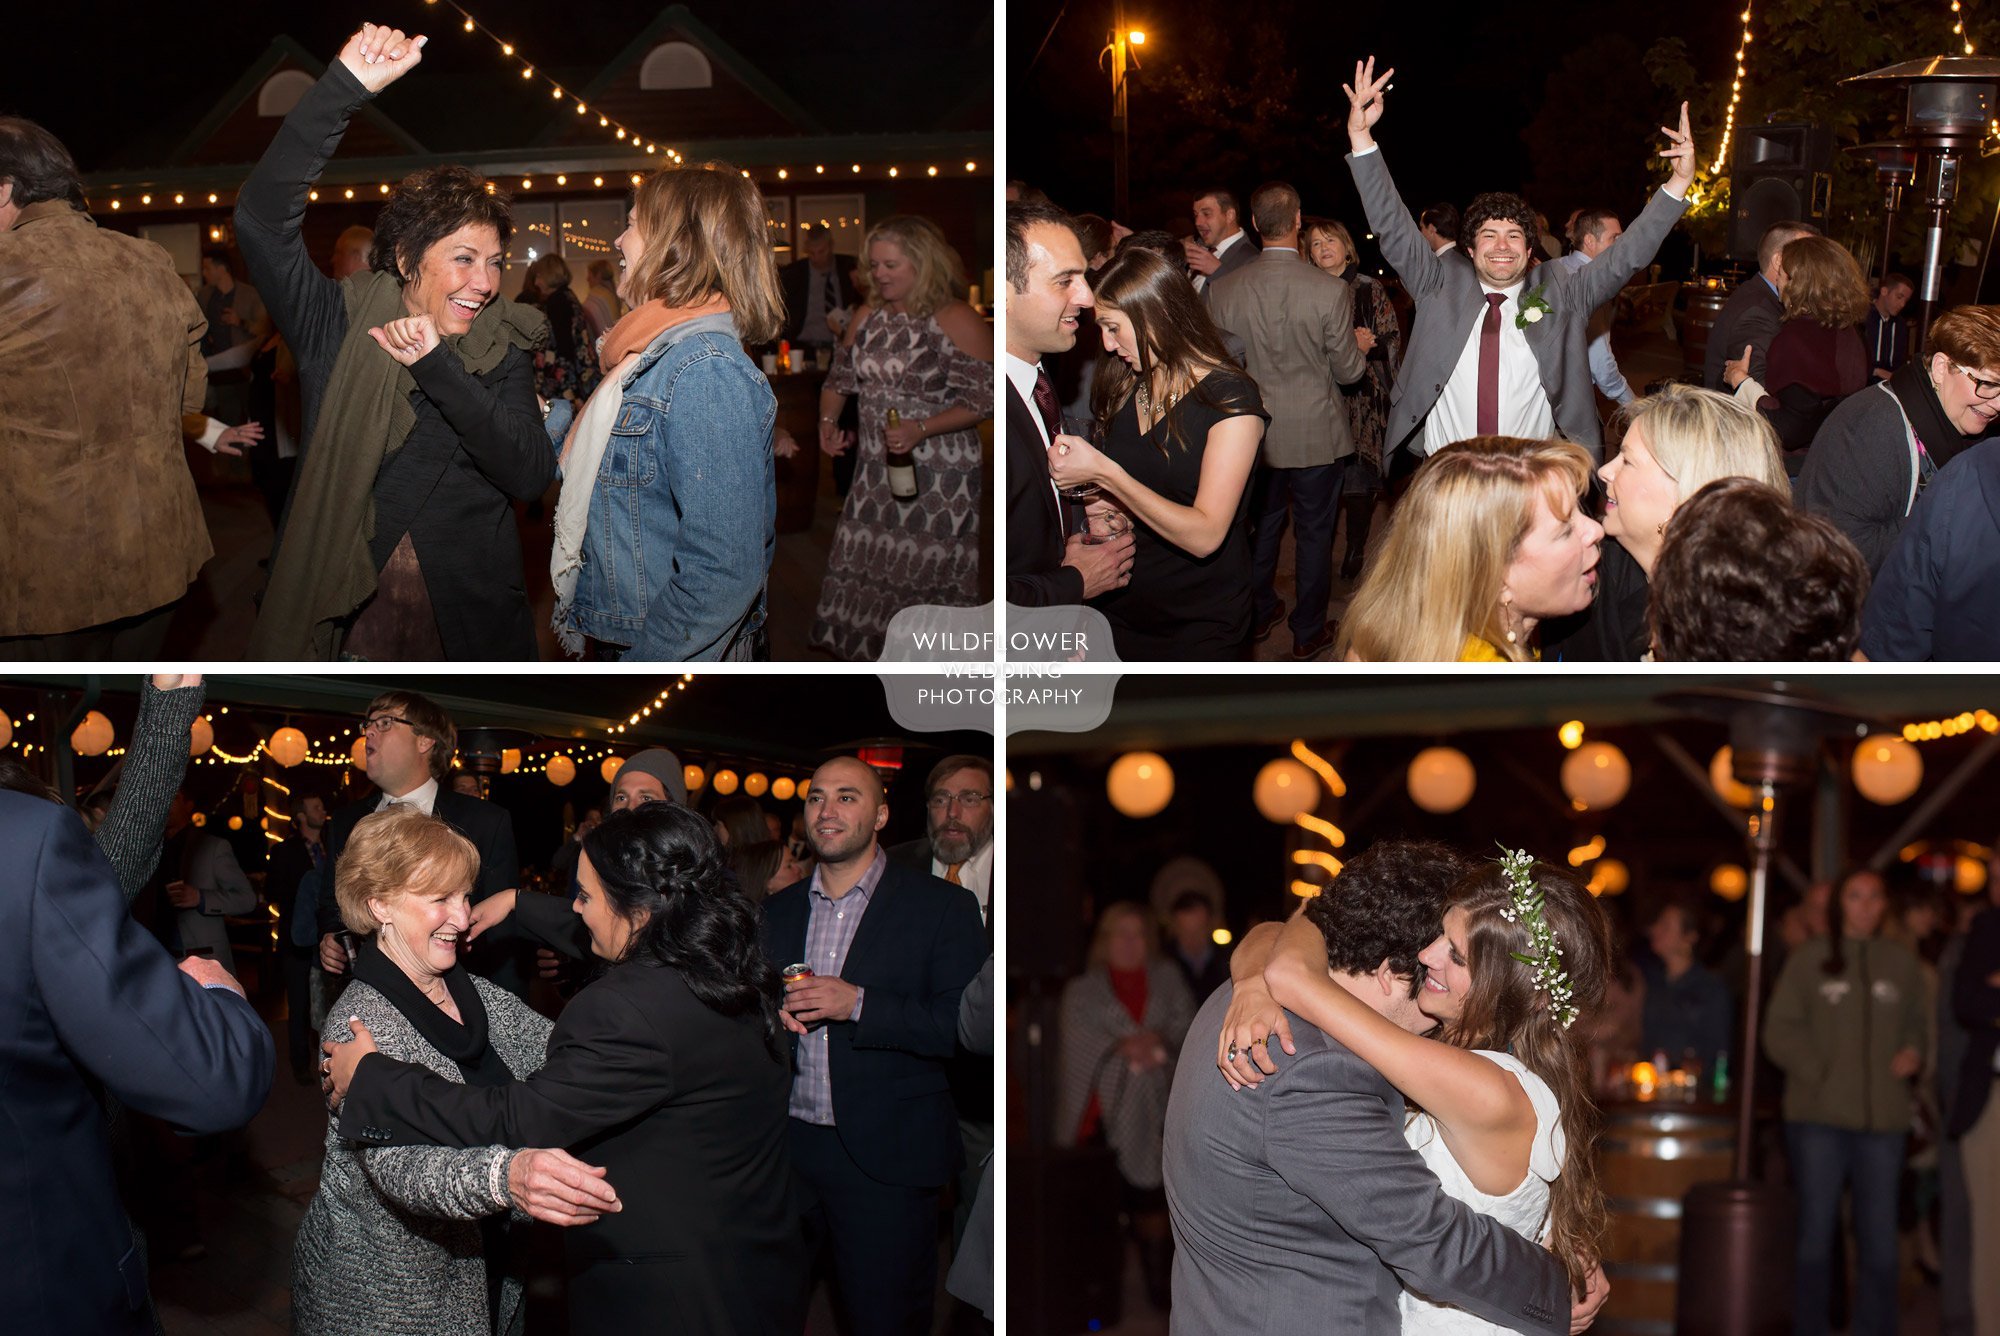 Wild dancing at the Little Piney Lodge rustic venue in Hermann.